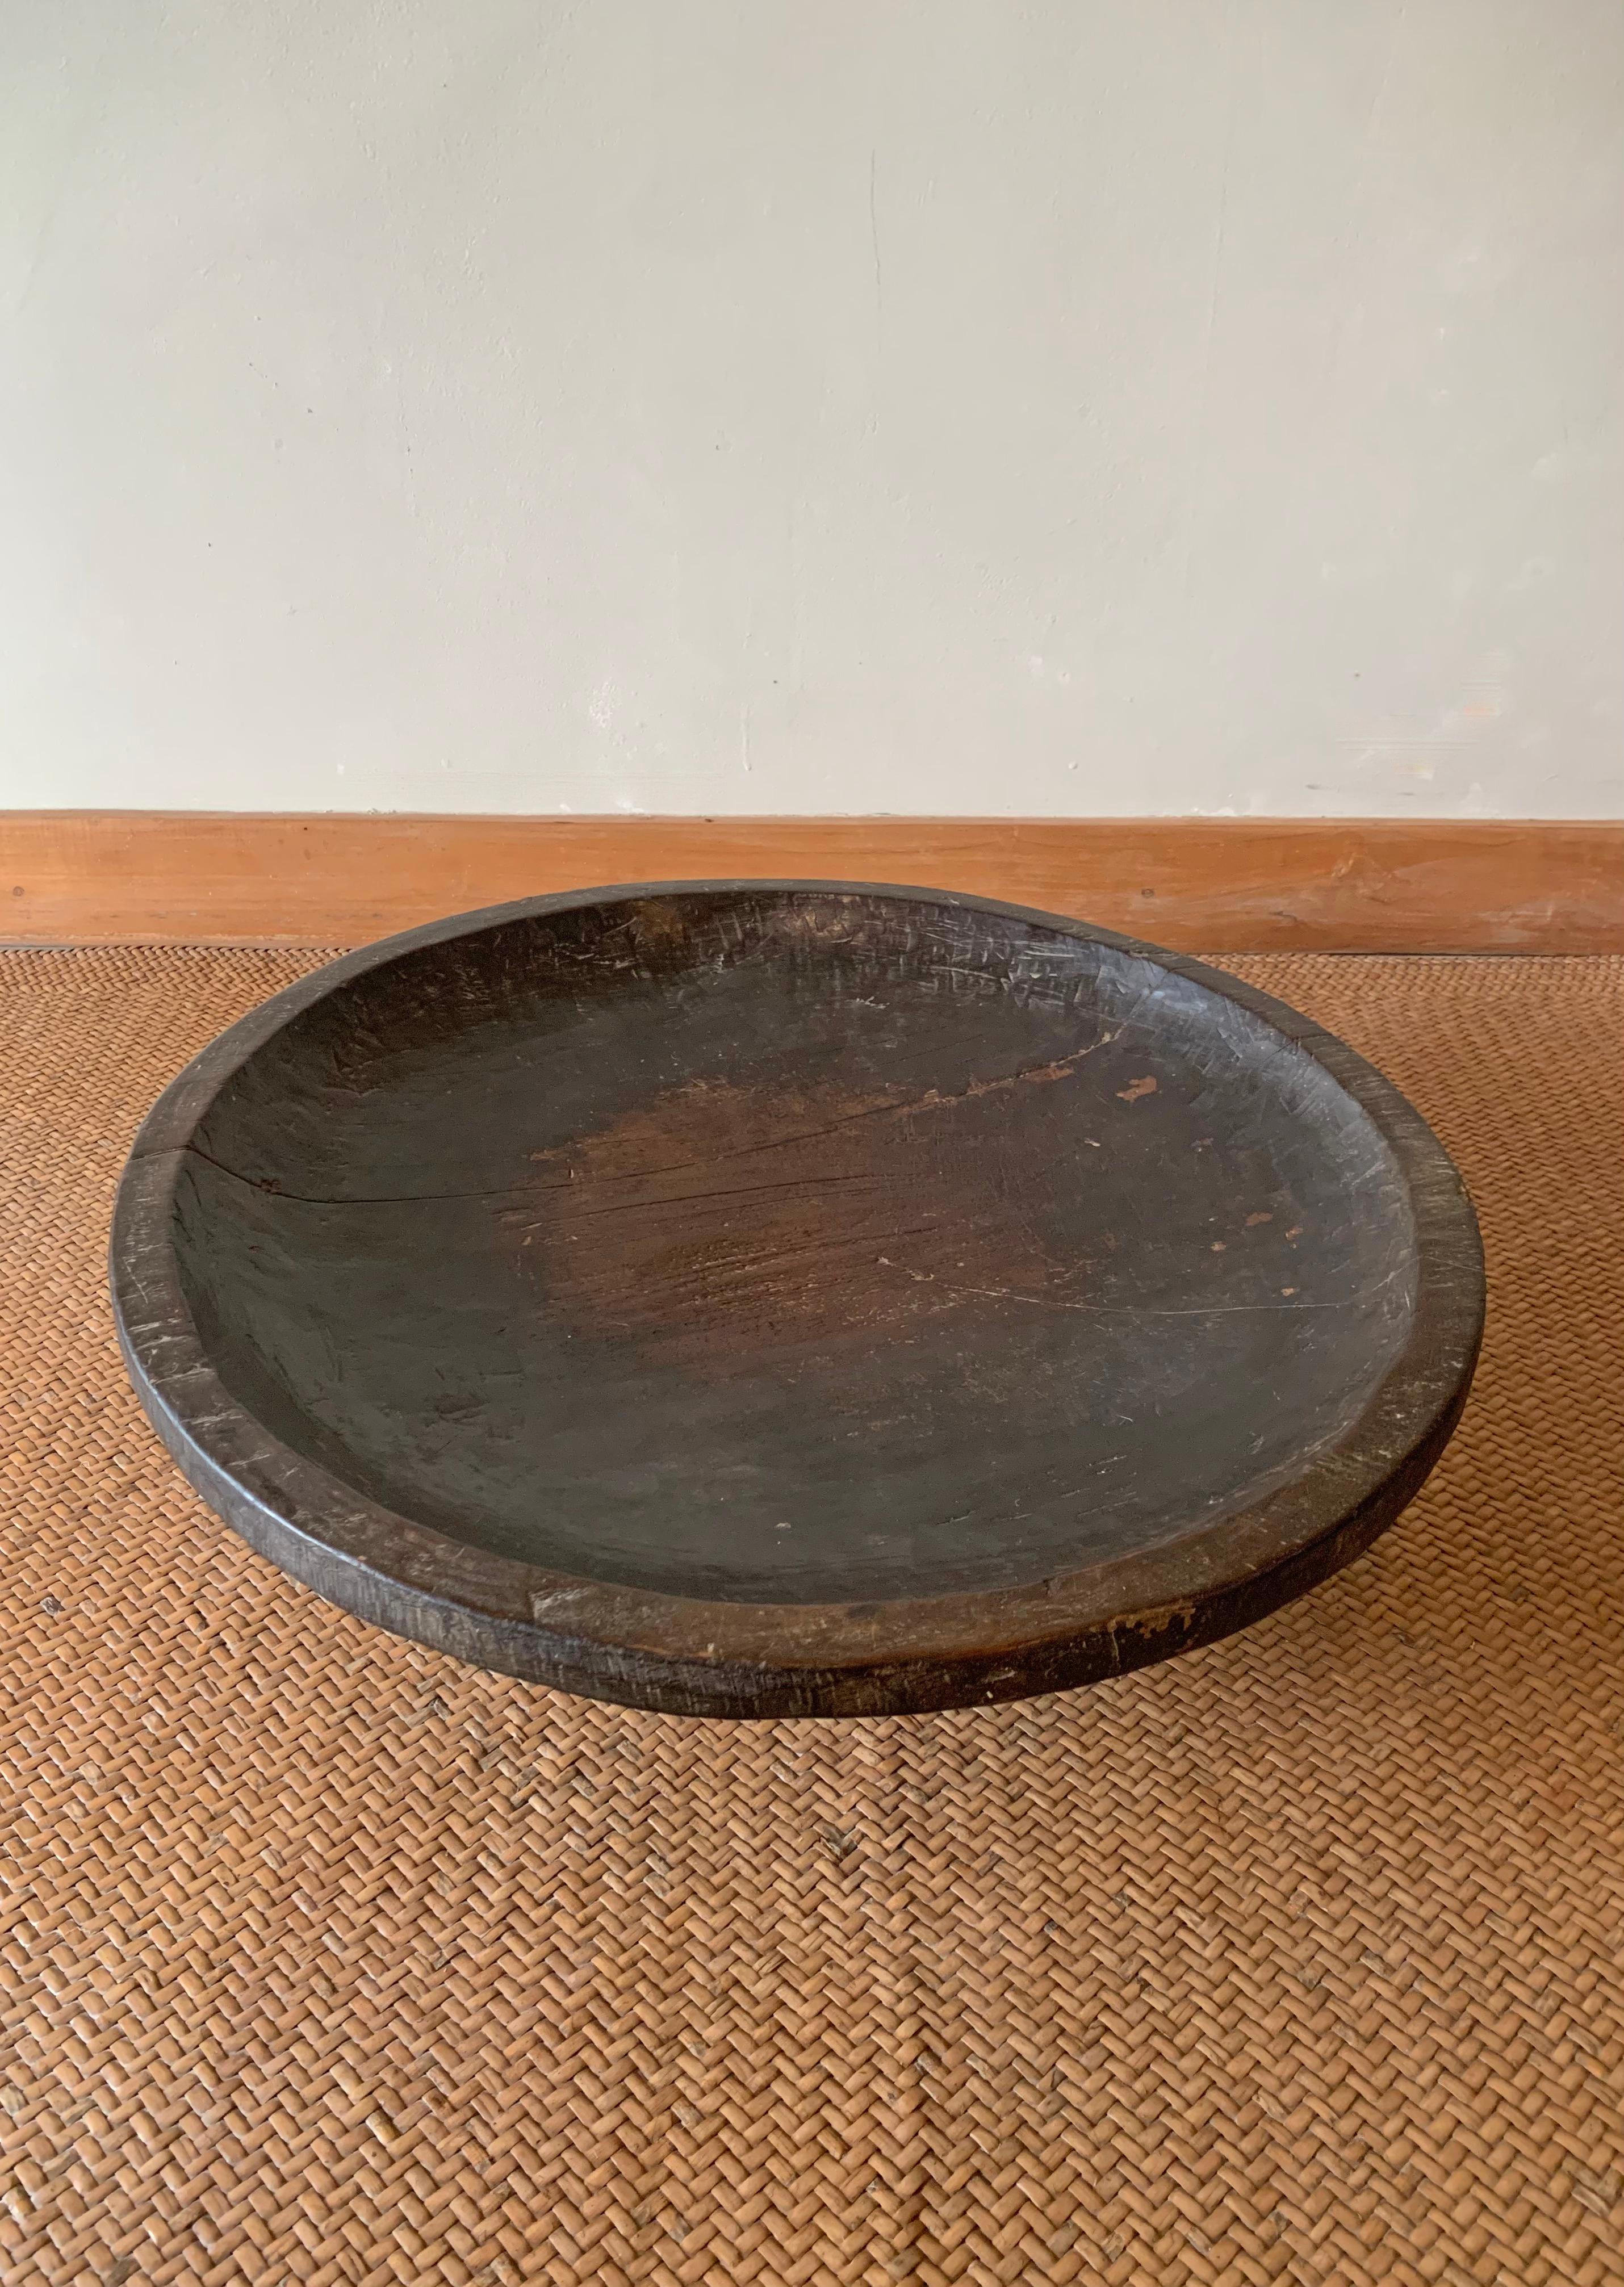 Batak tribe ceremonial bowl from jackfruit wood, early 20th century.

Dimensions: Diameter 45cm x height 18cm.